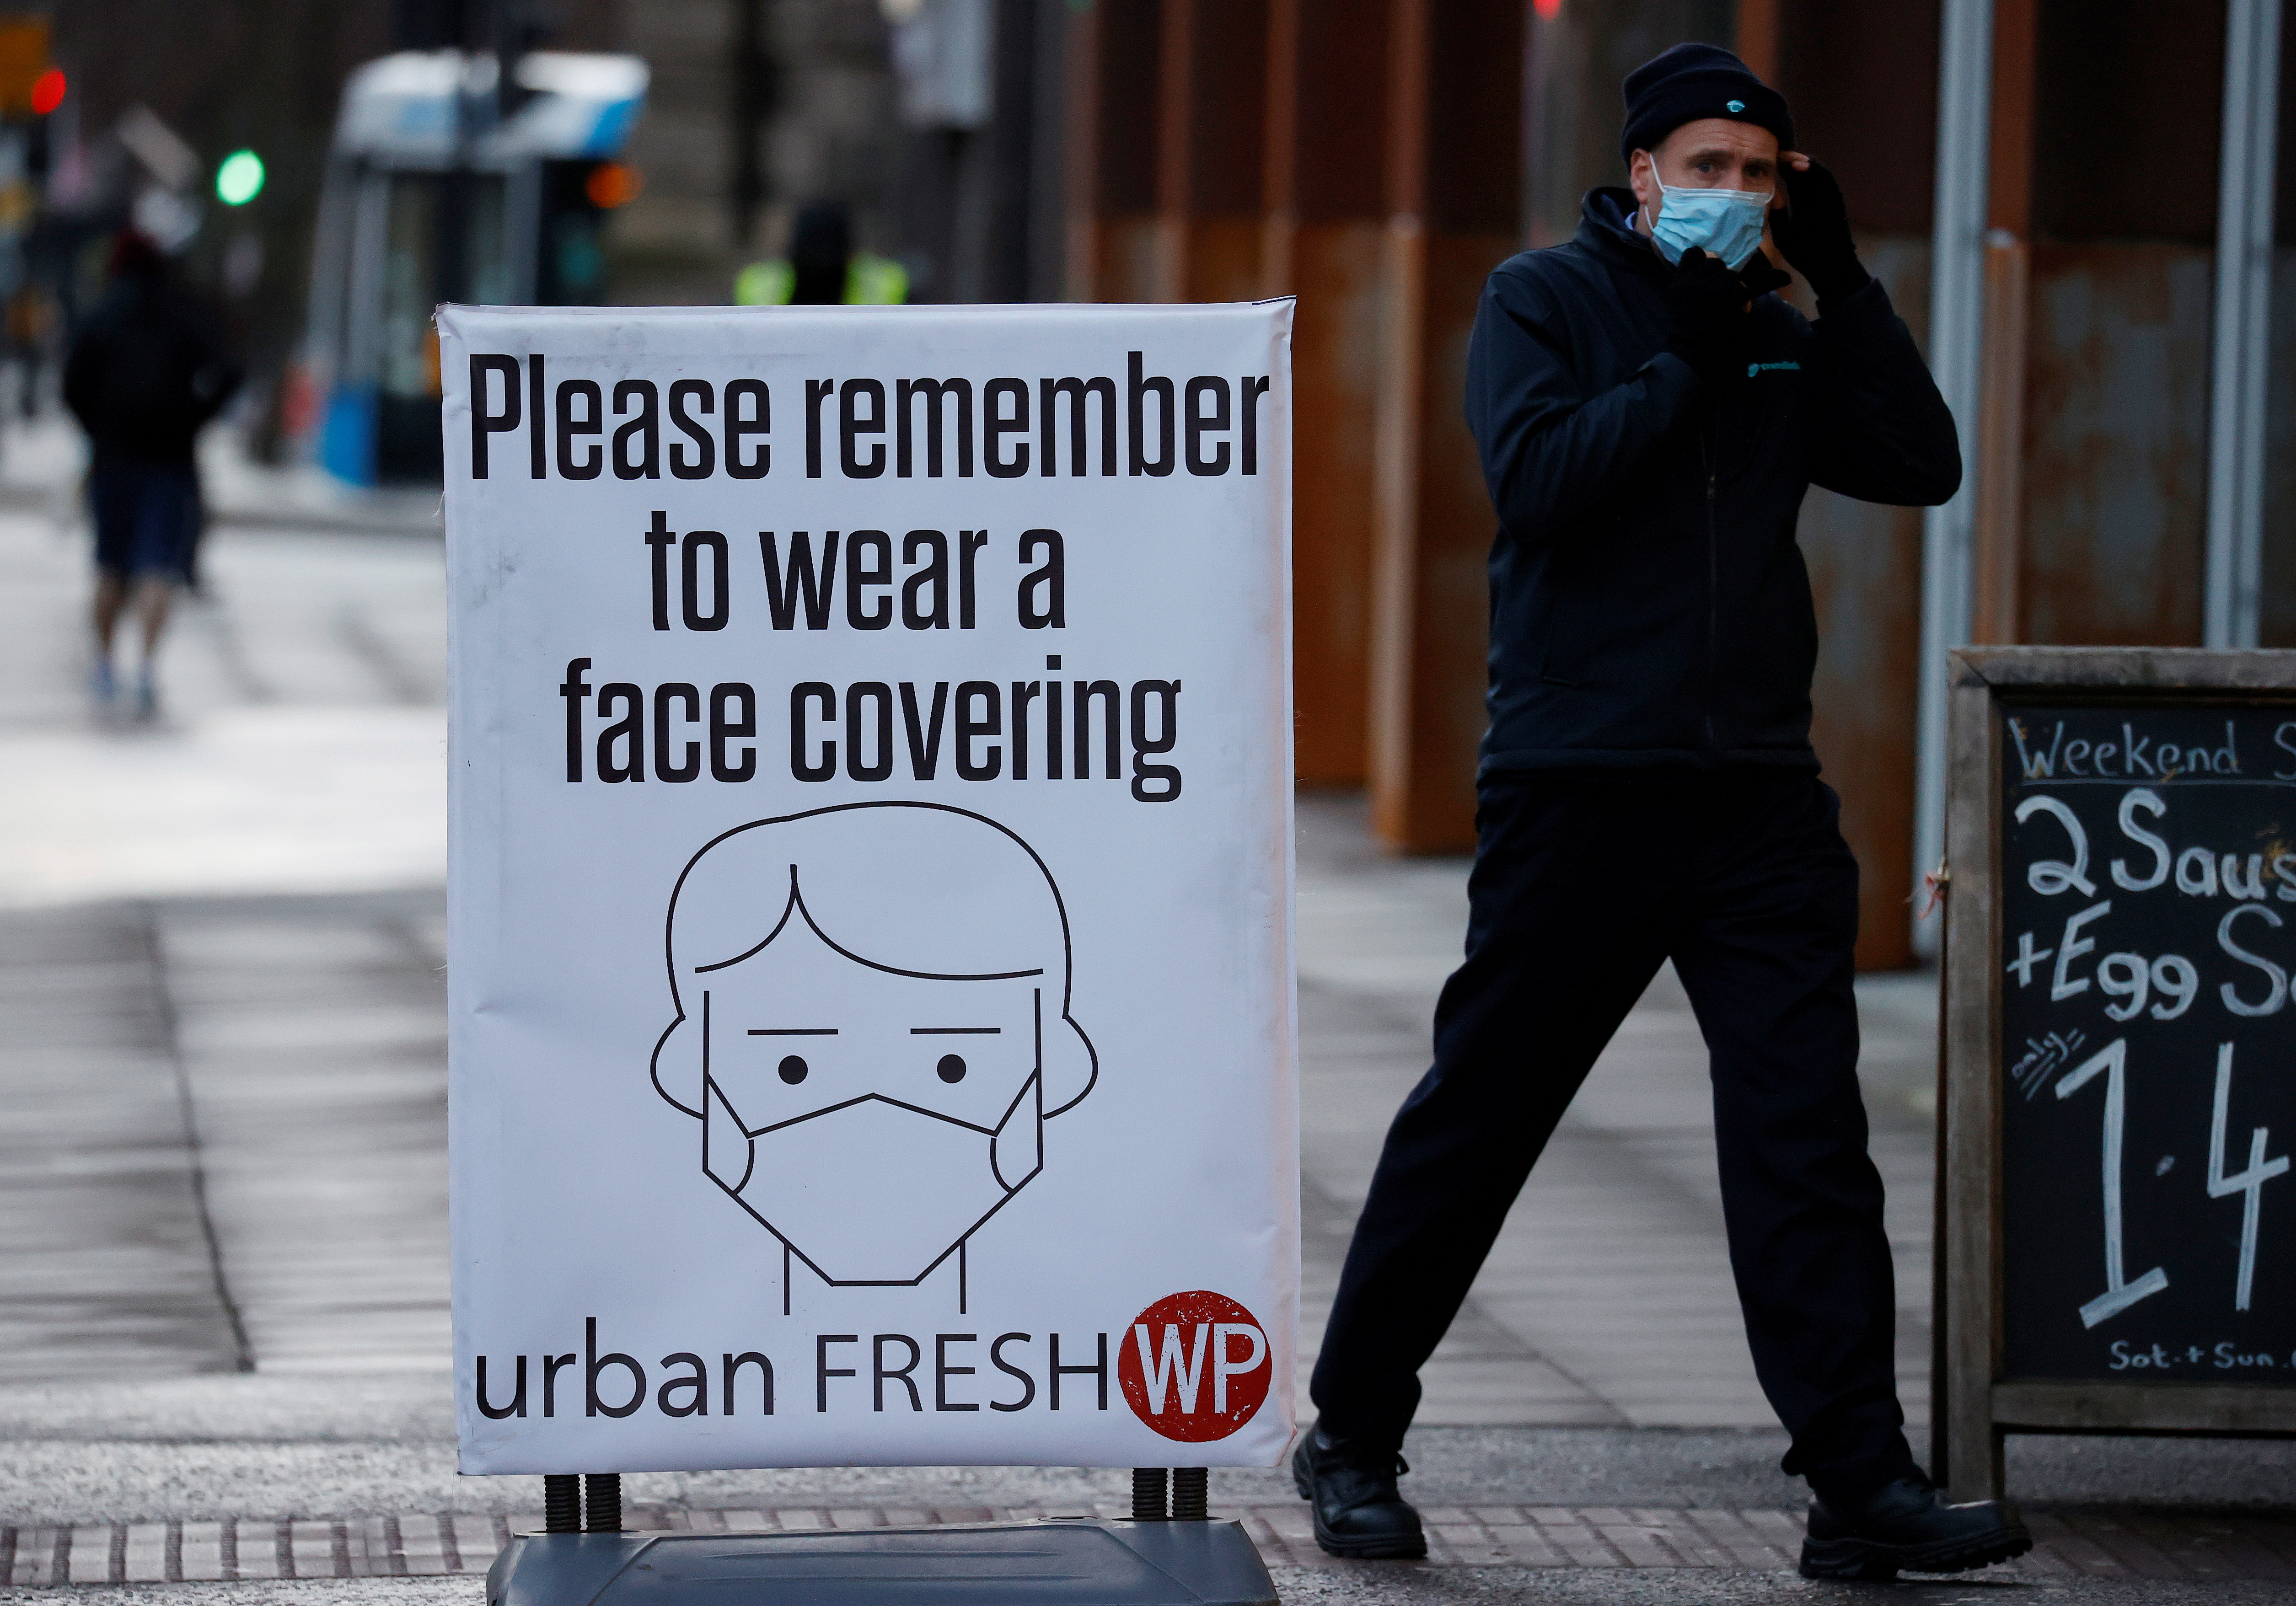 A man walks past a sign encouraging people to wear face coverings amid the COVID-19 outbreak in Belfast, Northern Ireland January 2, 2021. REUTERS/Phil Noble/Files